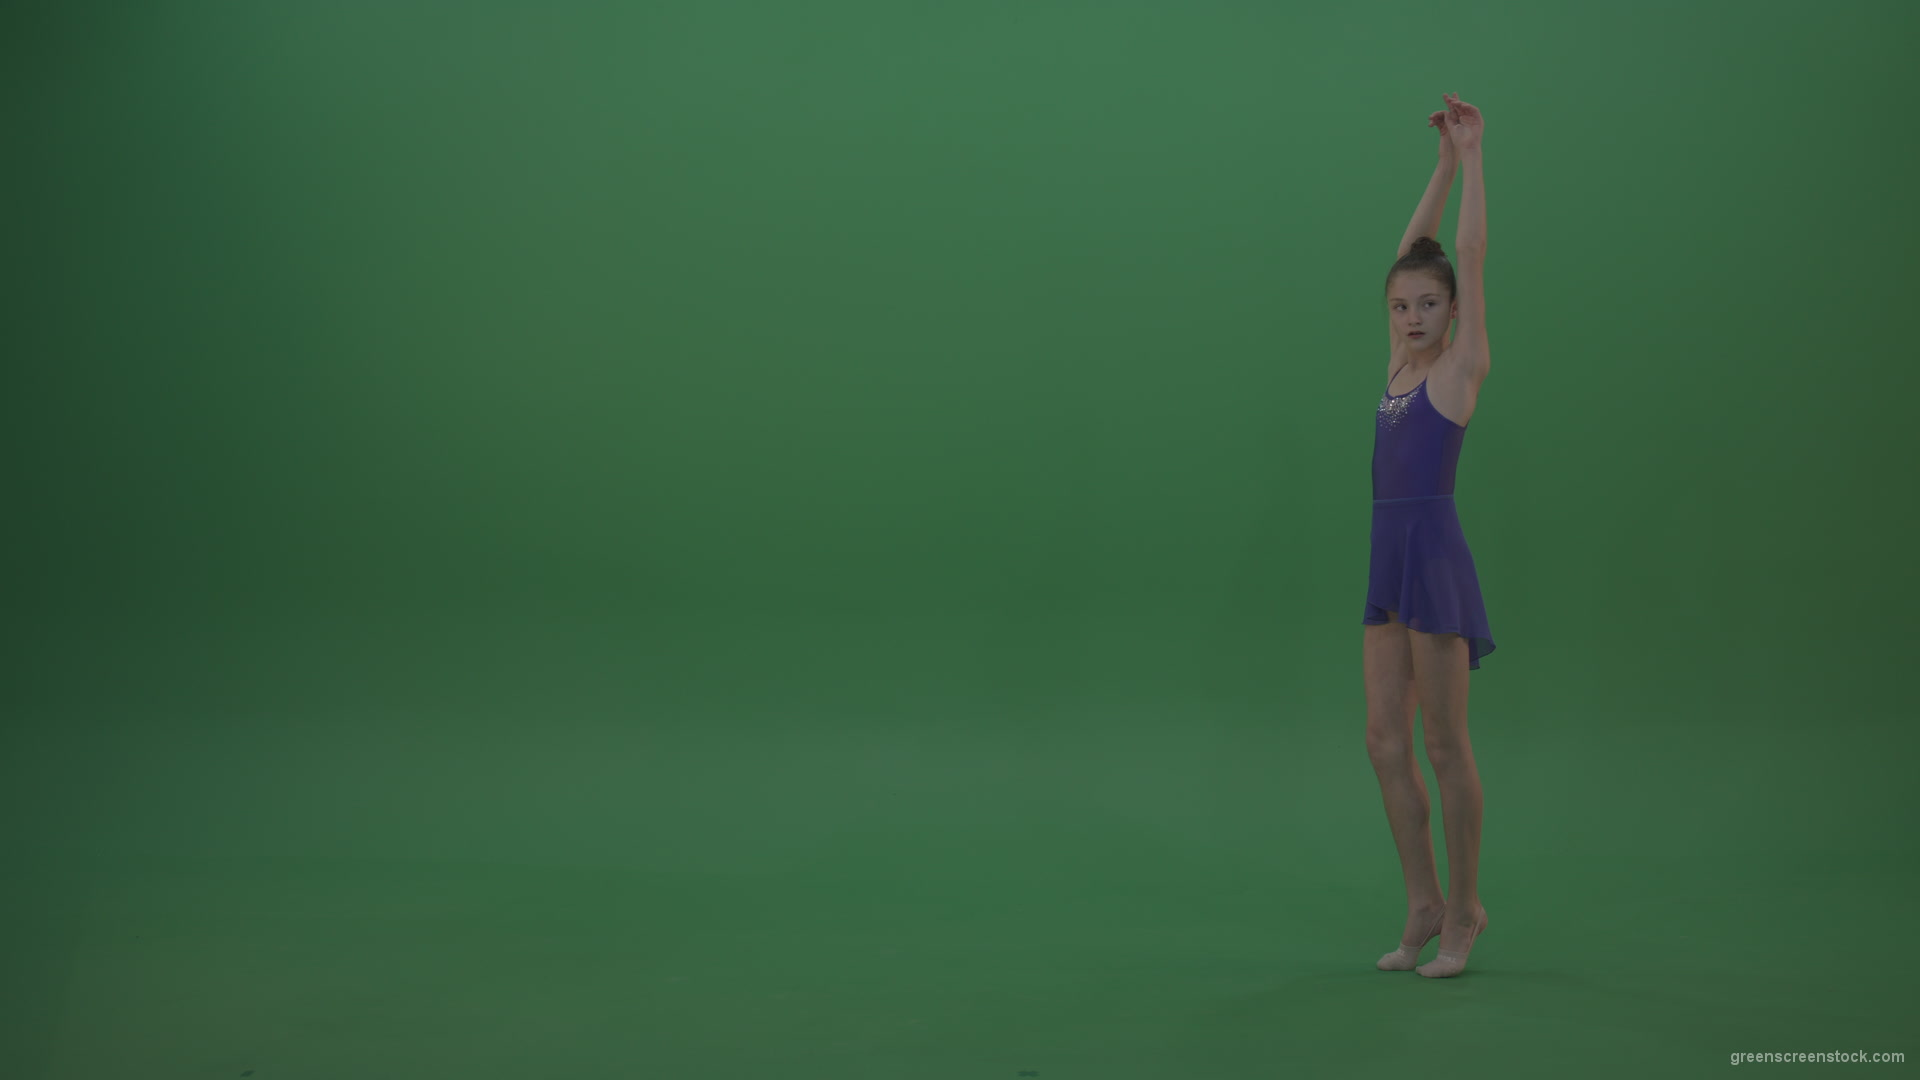 Young_Gymnast_Female_Wearing_Blue_Show_Costume_Performing_Great_Spinning_Arabesque_Moves_Showing_Awesome_Technique_On_Green_Screen_Wall_Background_001 Green Screen Stock